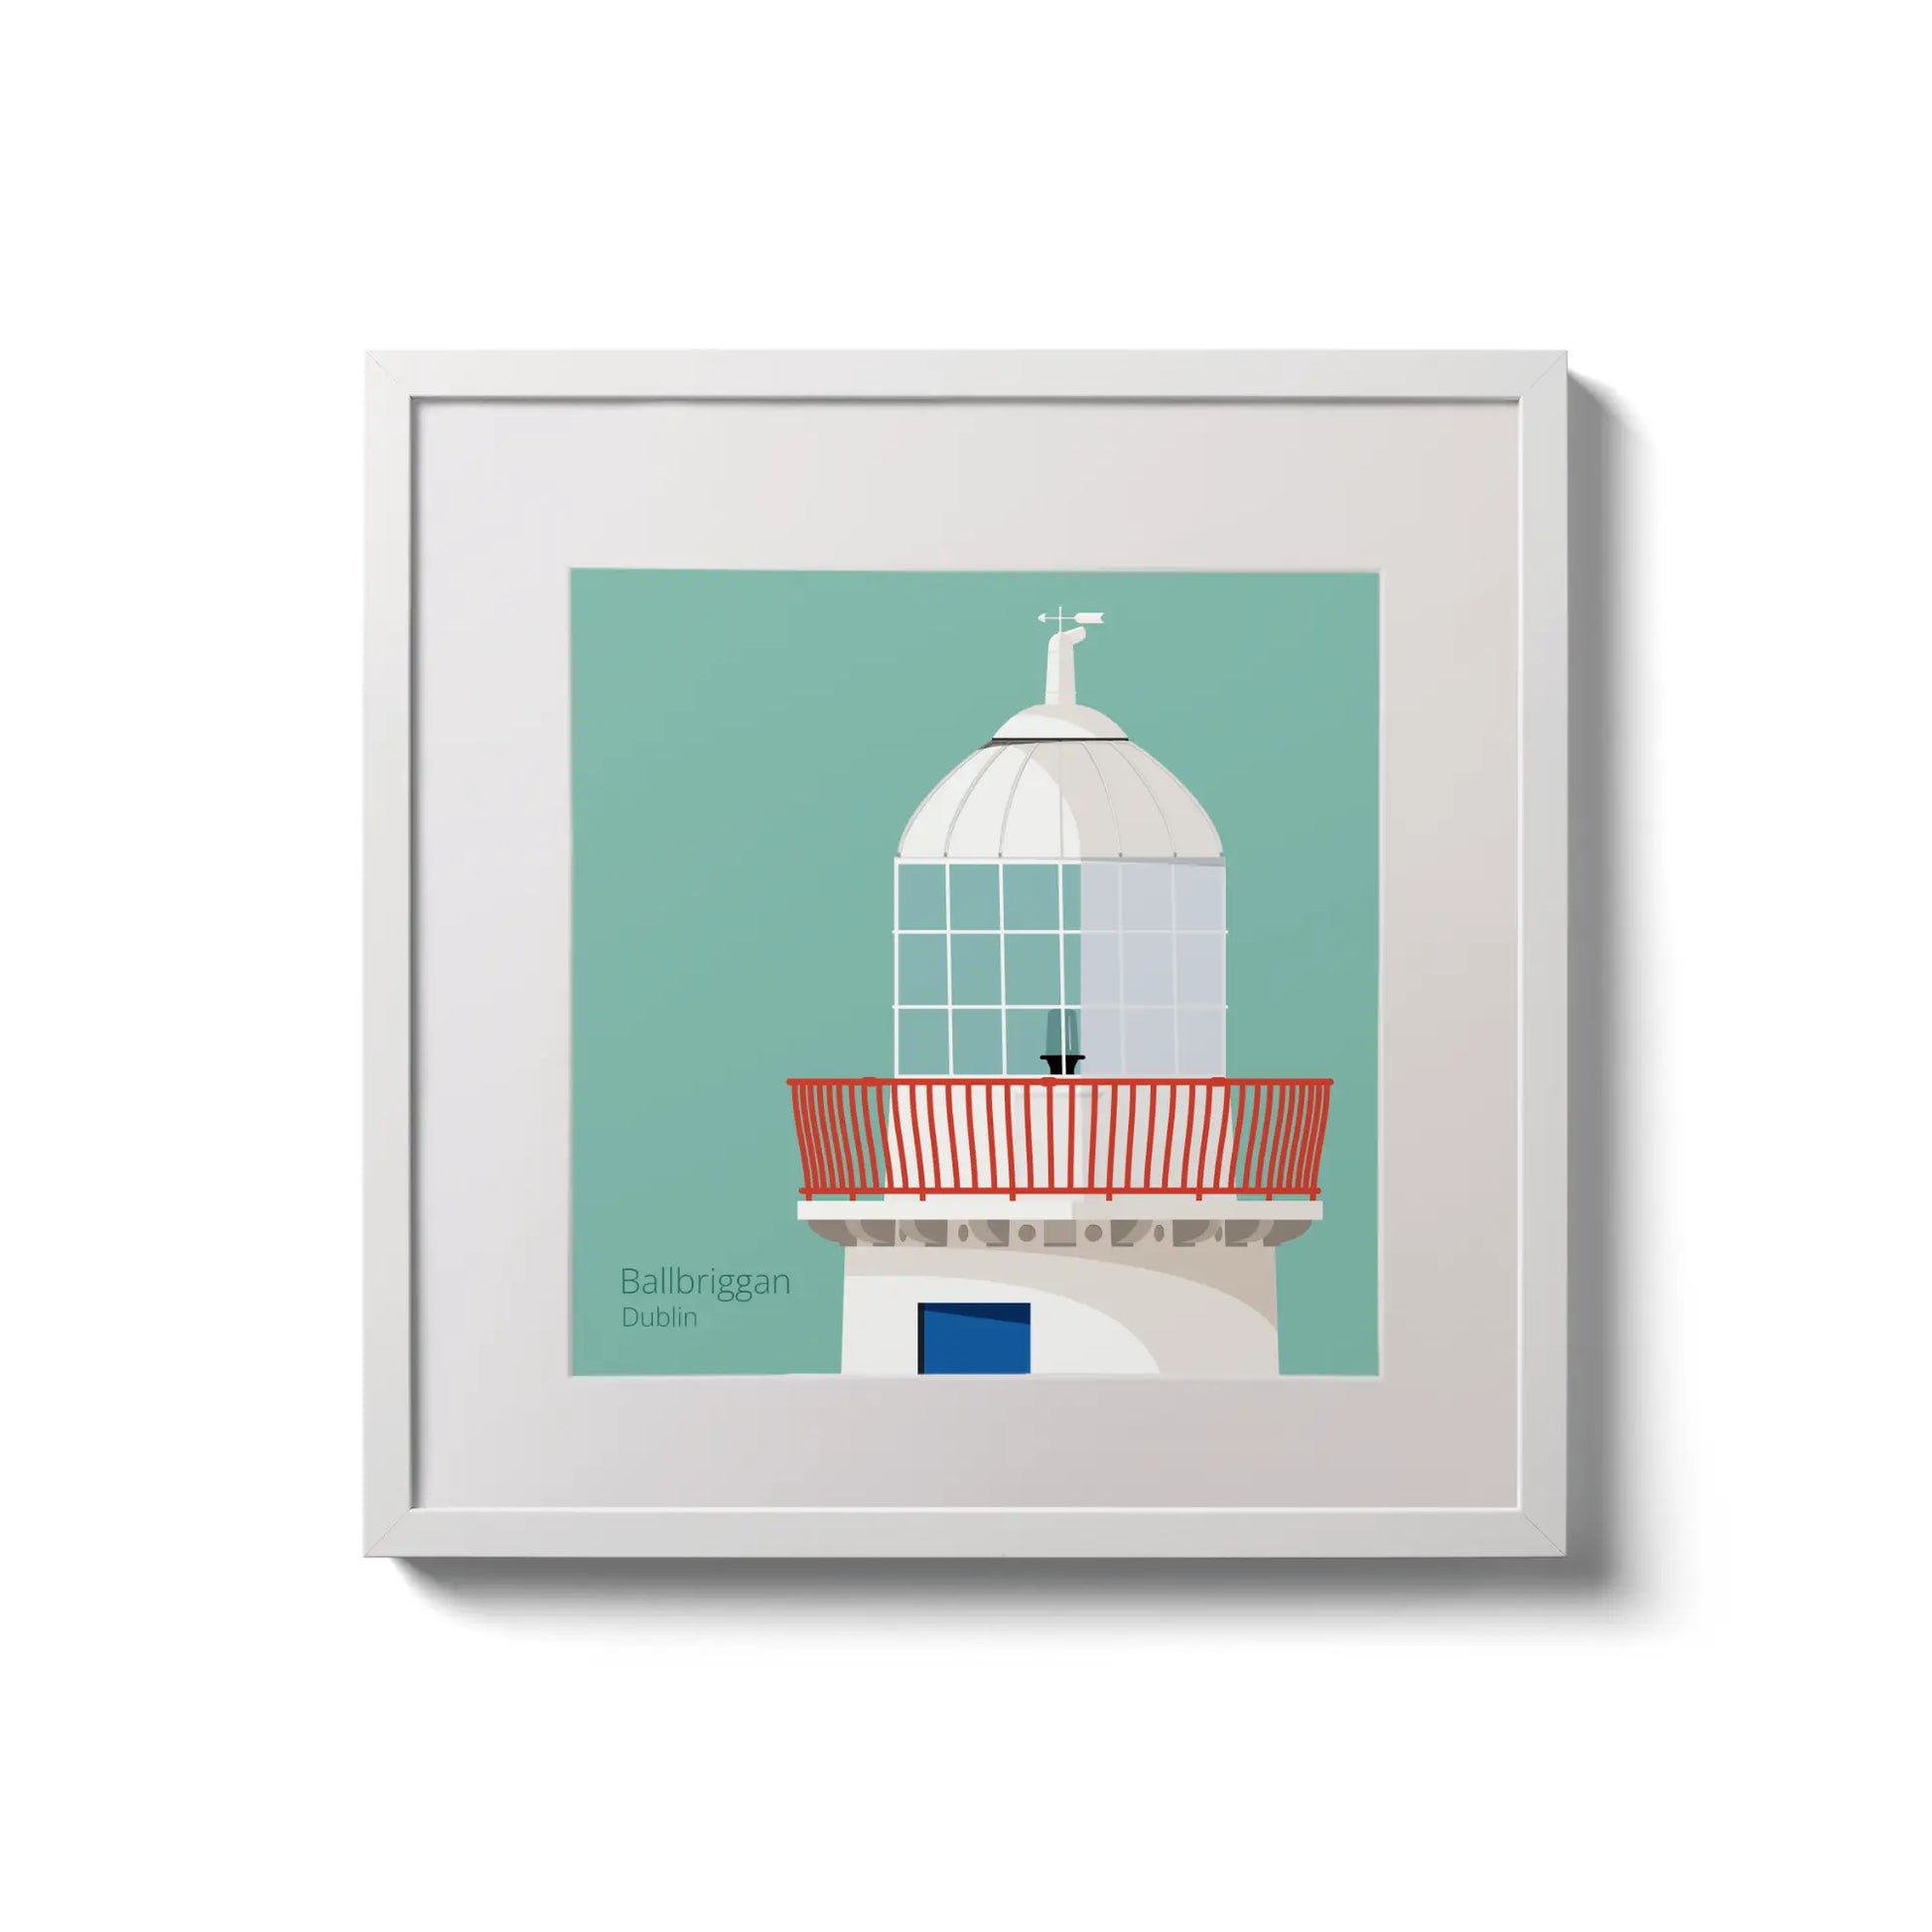 Contemporary wall hanging Ballbriggan lighthouse on an ocean green background,  in a white square frame measuring 20x20cm.